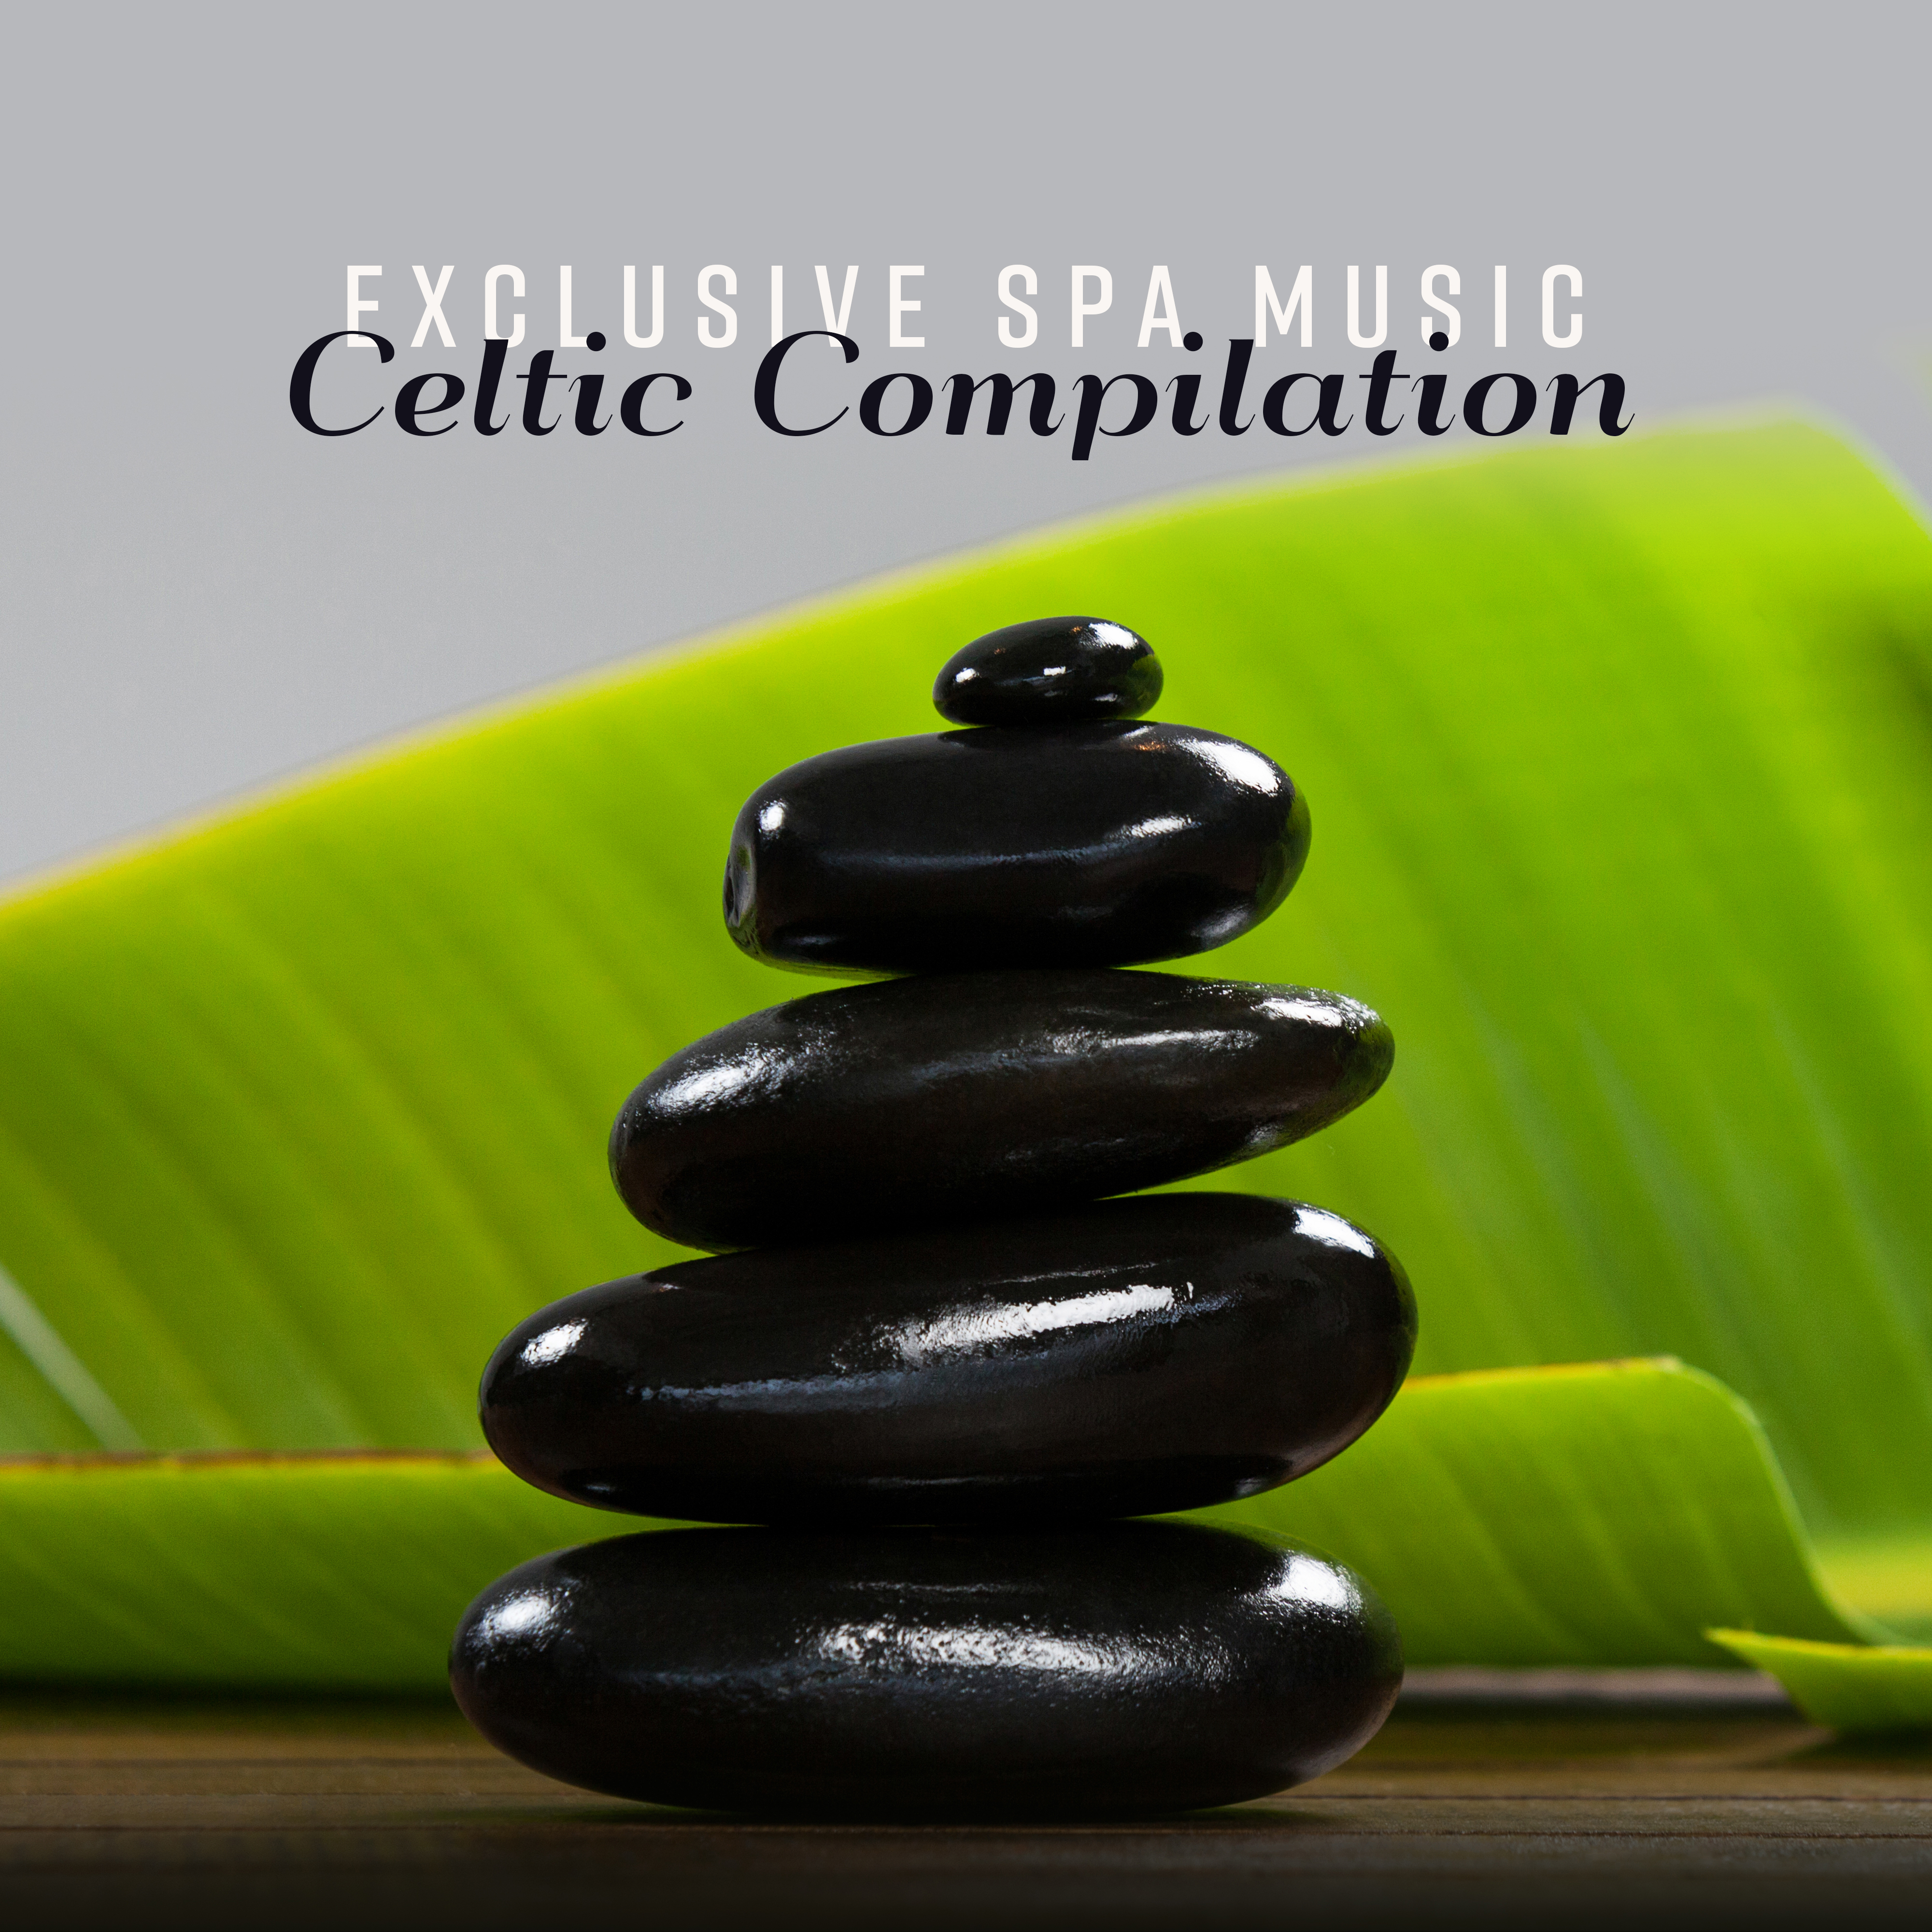 Exclusive Spa Music: Celtic Compilation